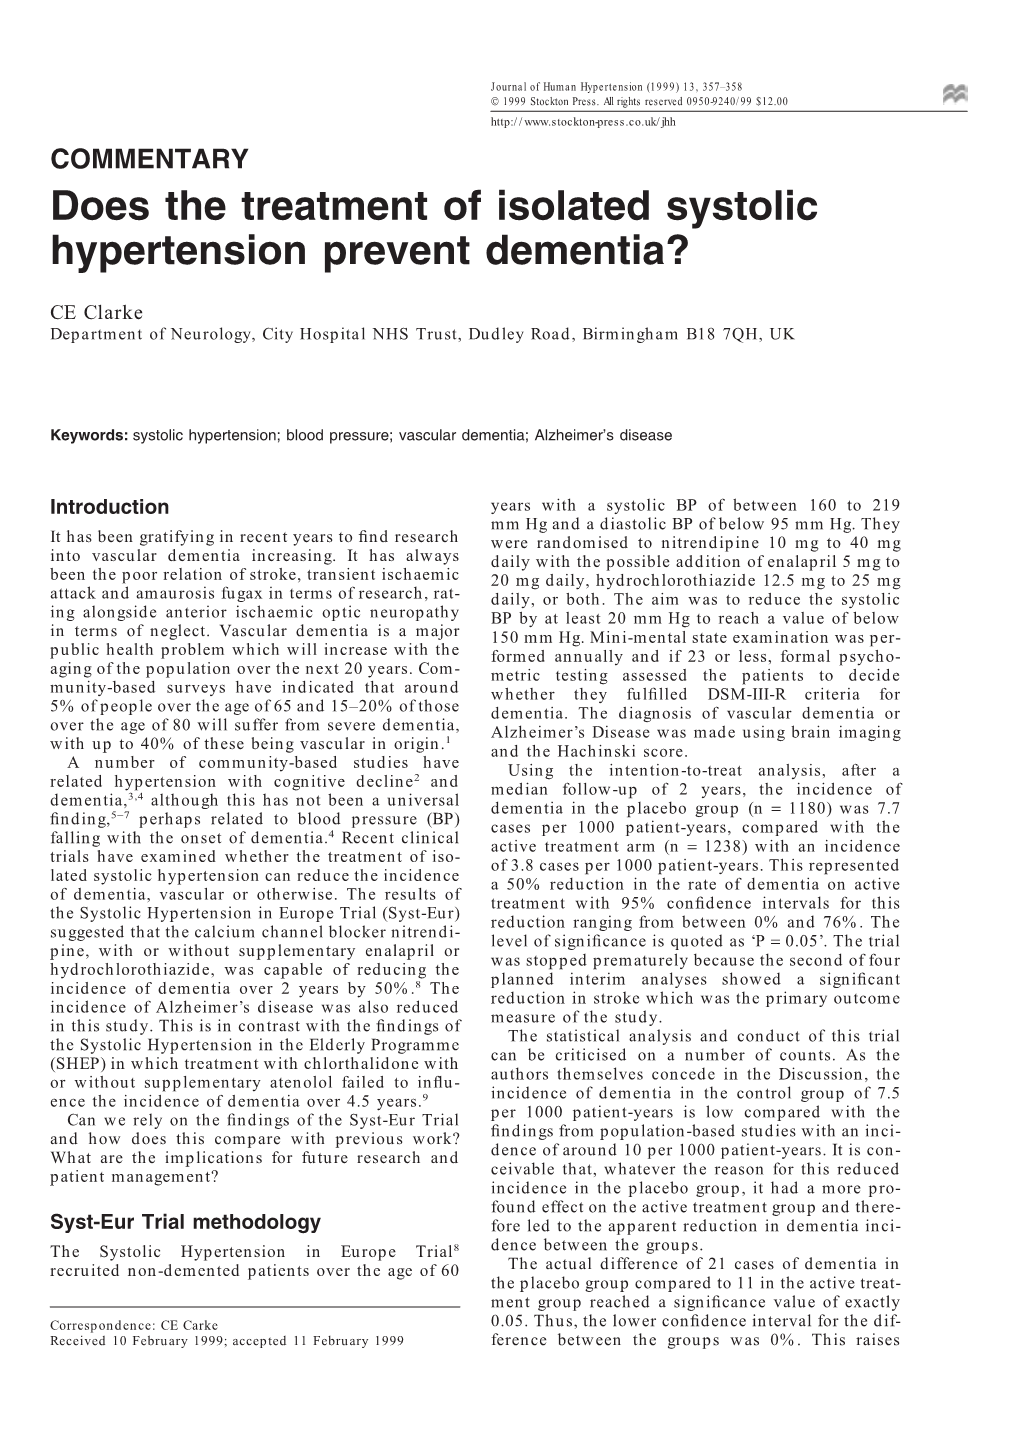 Does the Treatment of Isolated Systolic Hypertension Prevent Dementia?